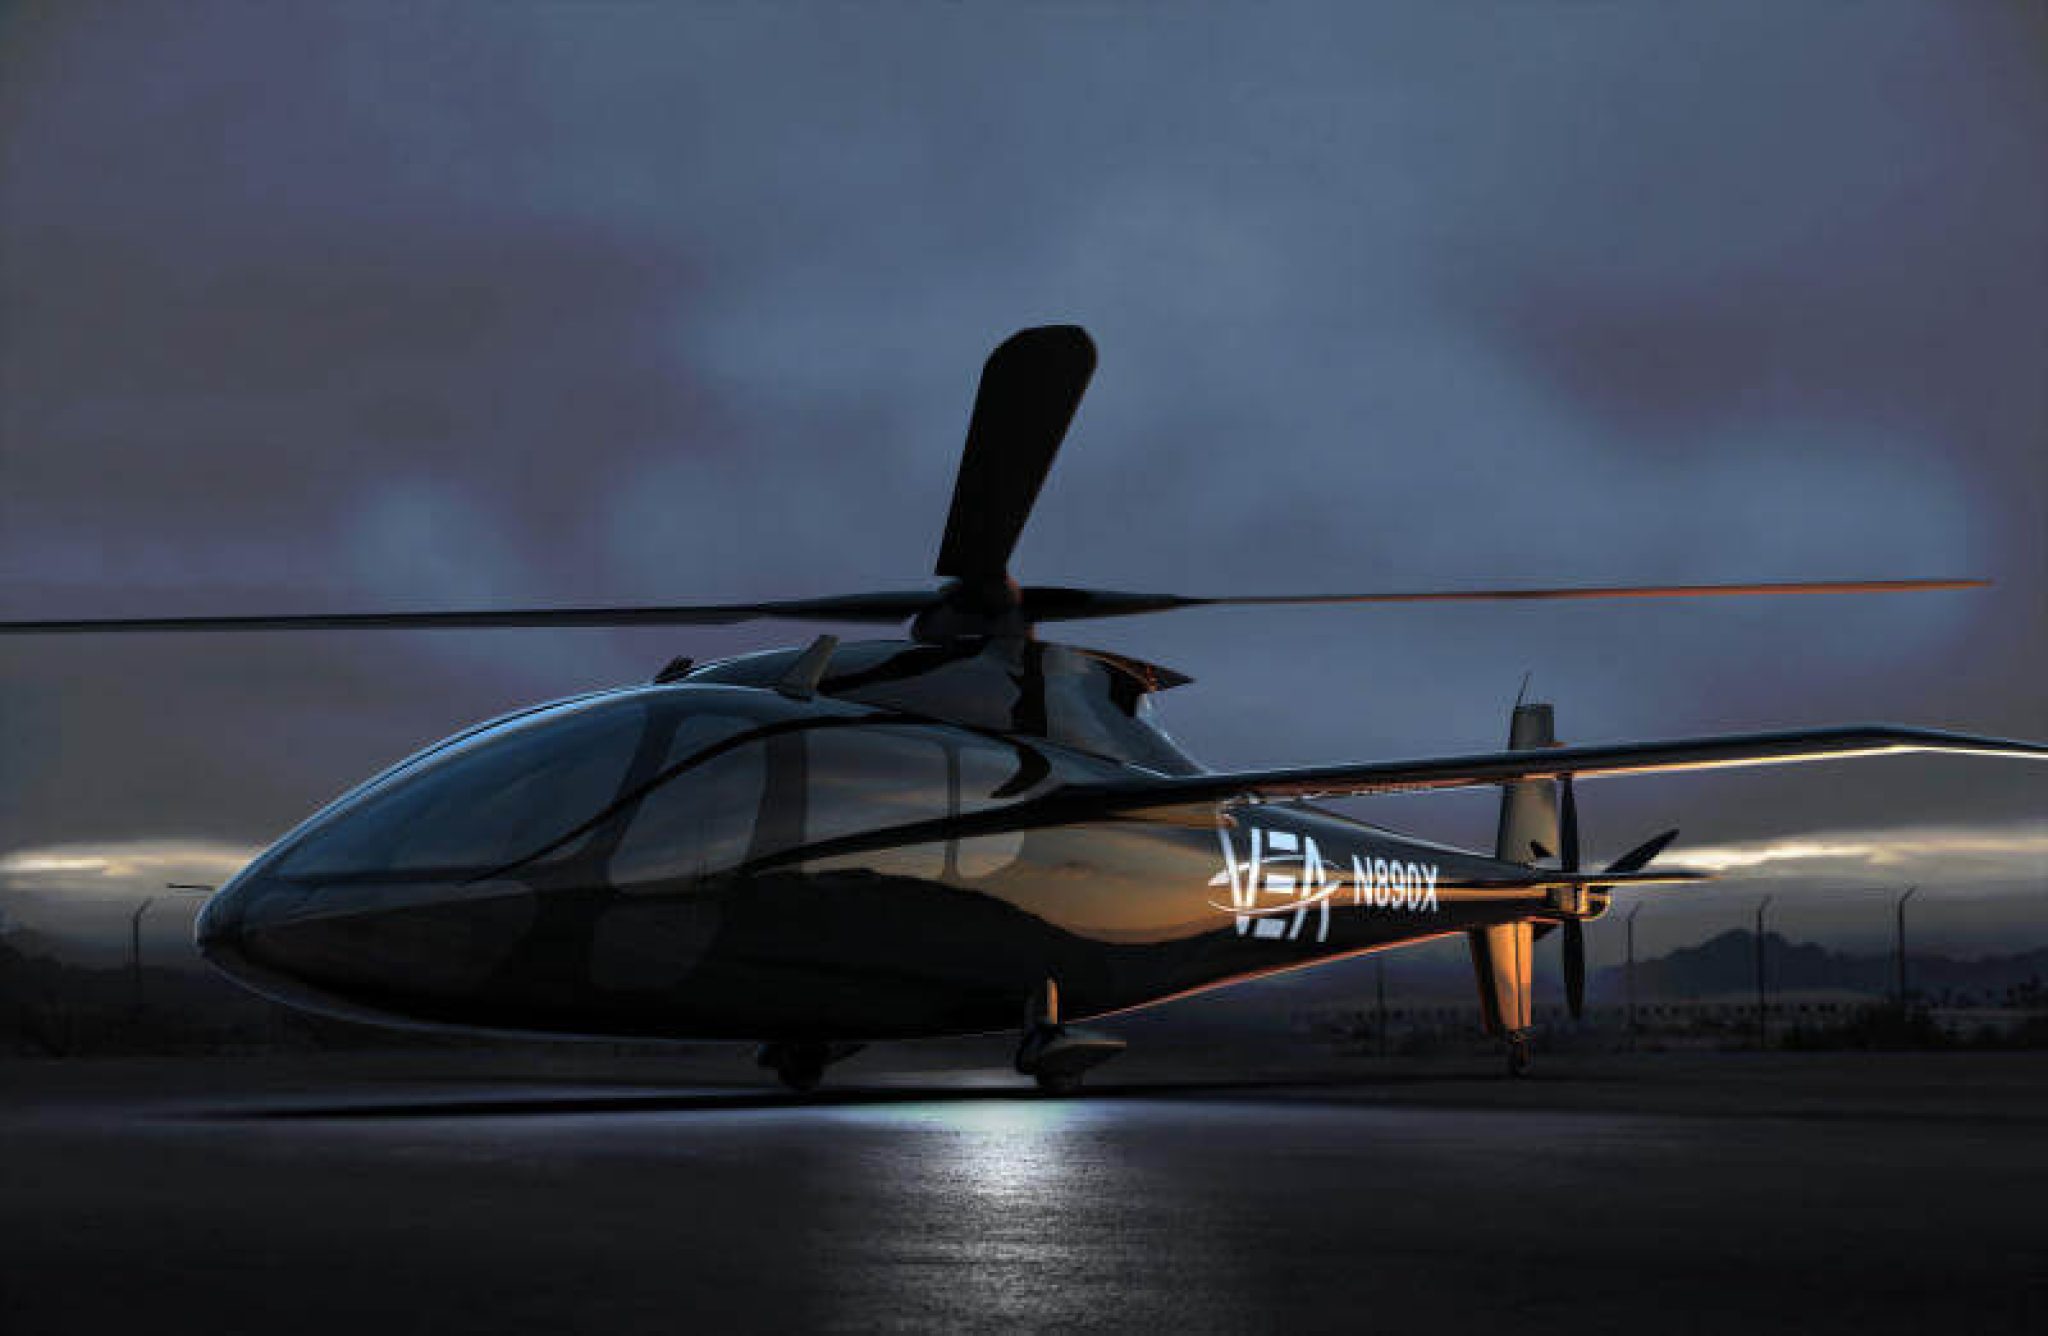 The PA-890 eVTOL is The World’s First Hydrogen Powered Helicopter ...